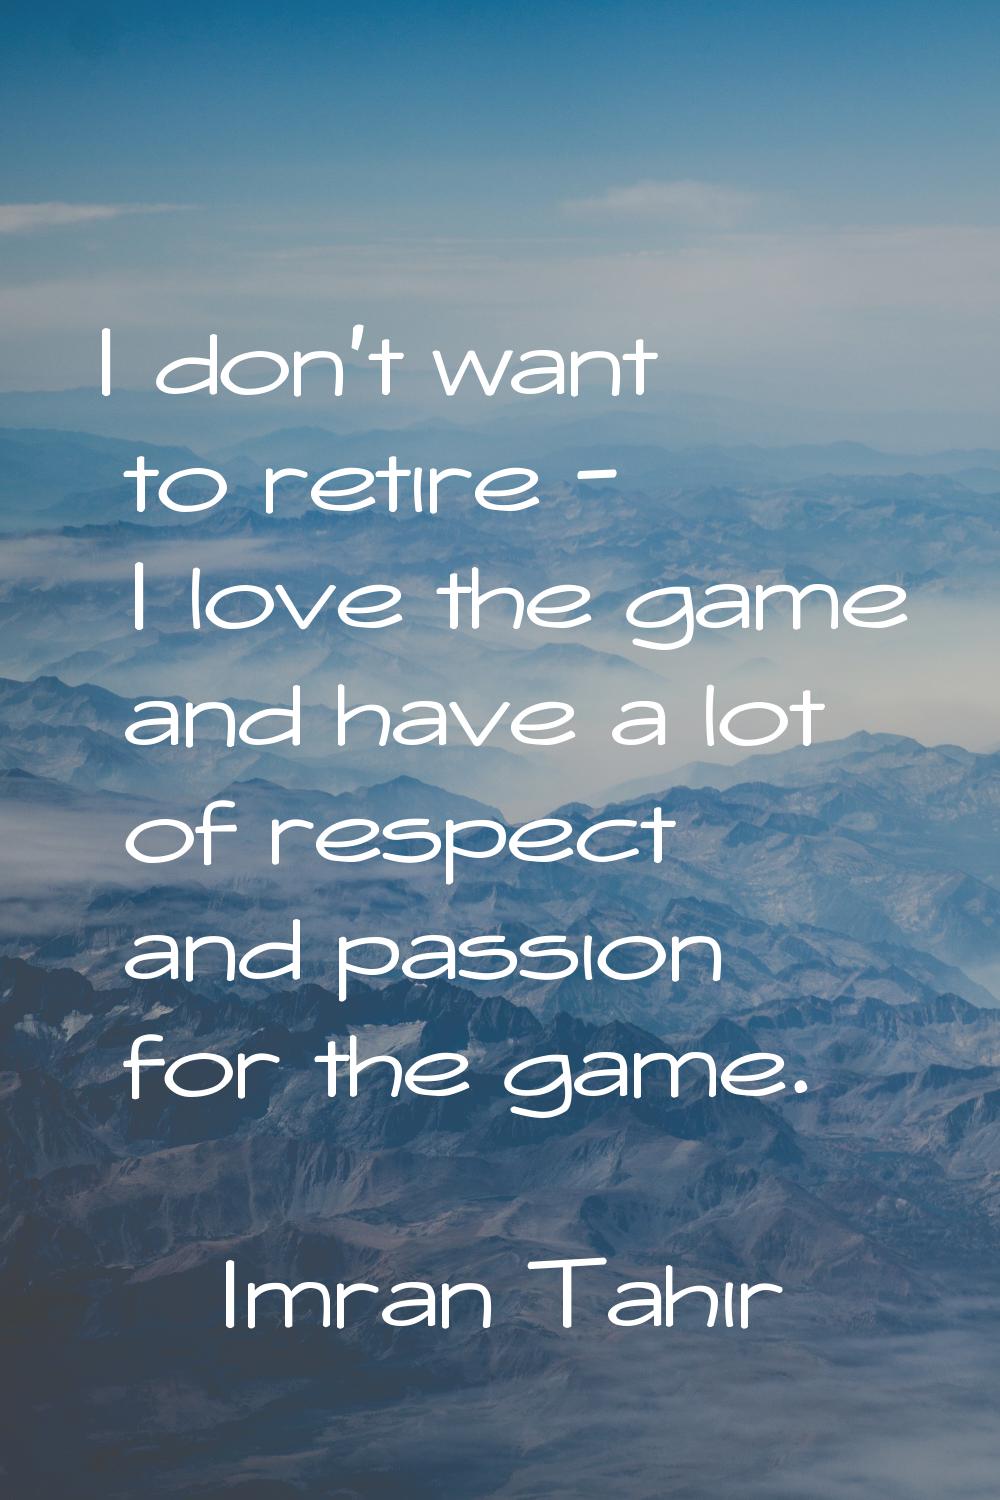 I don't want to retire - I love the game and have a lot of respect and passion for the game.